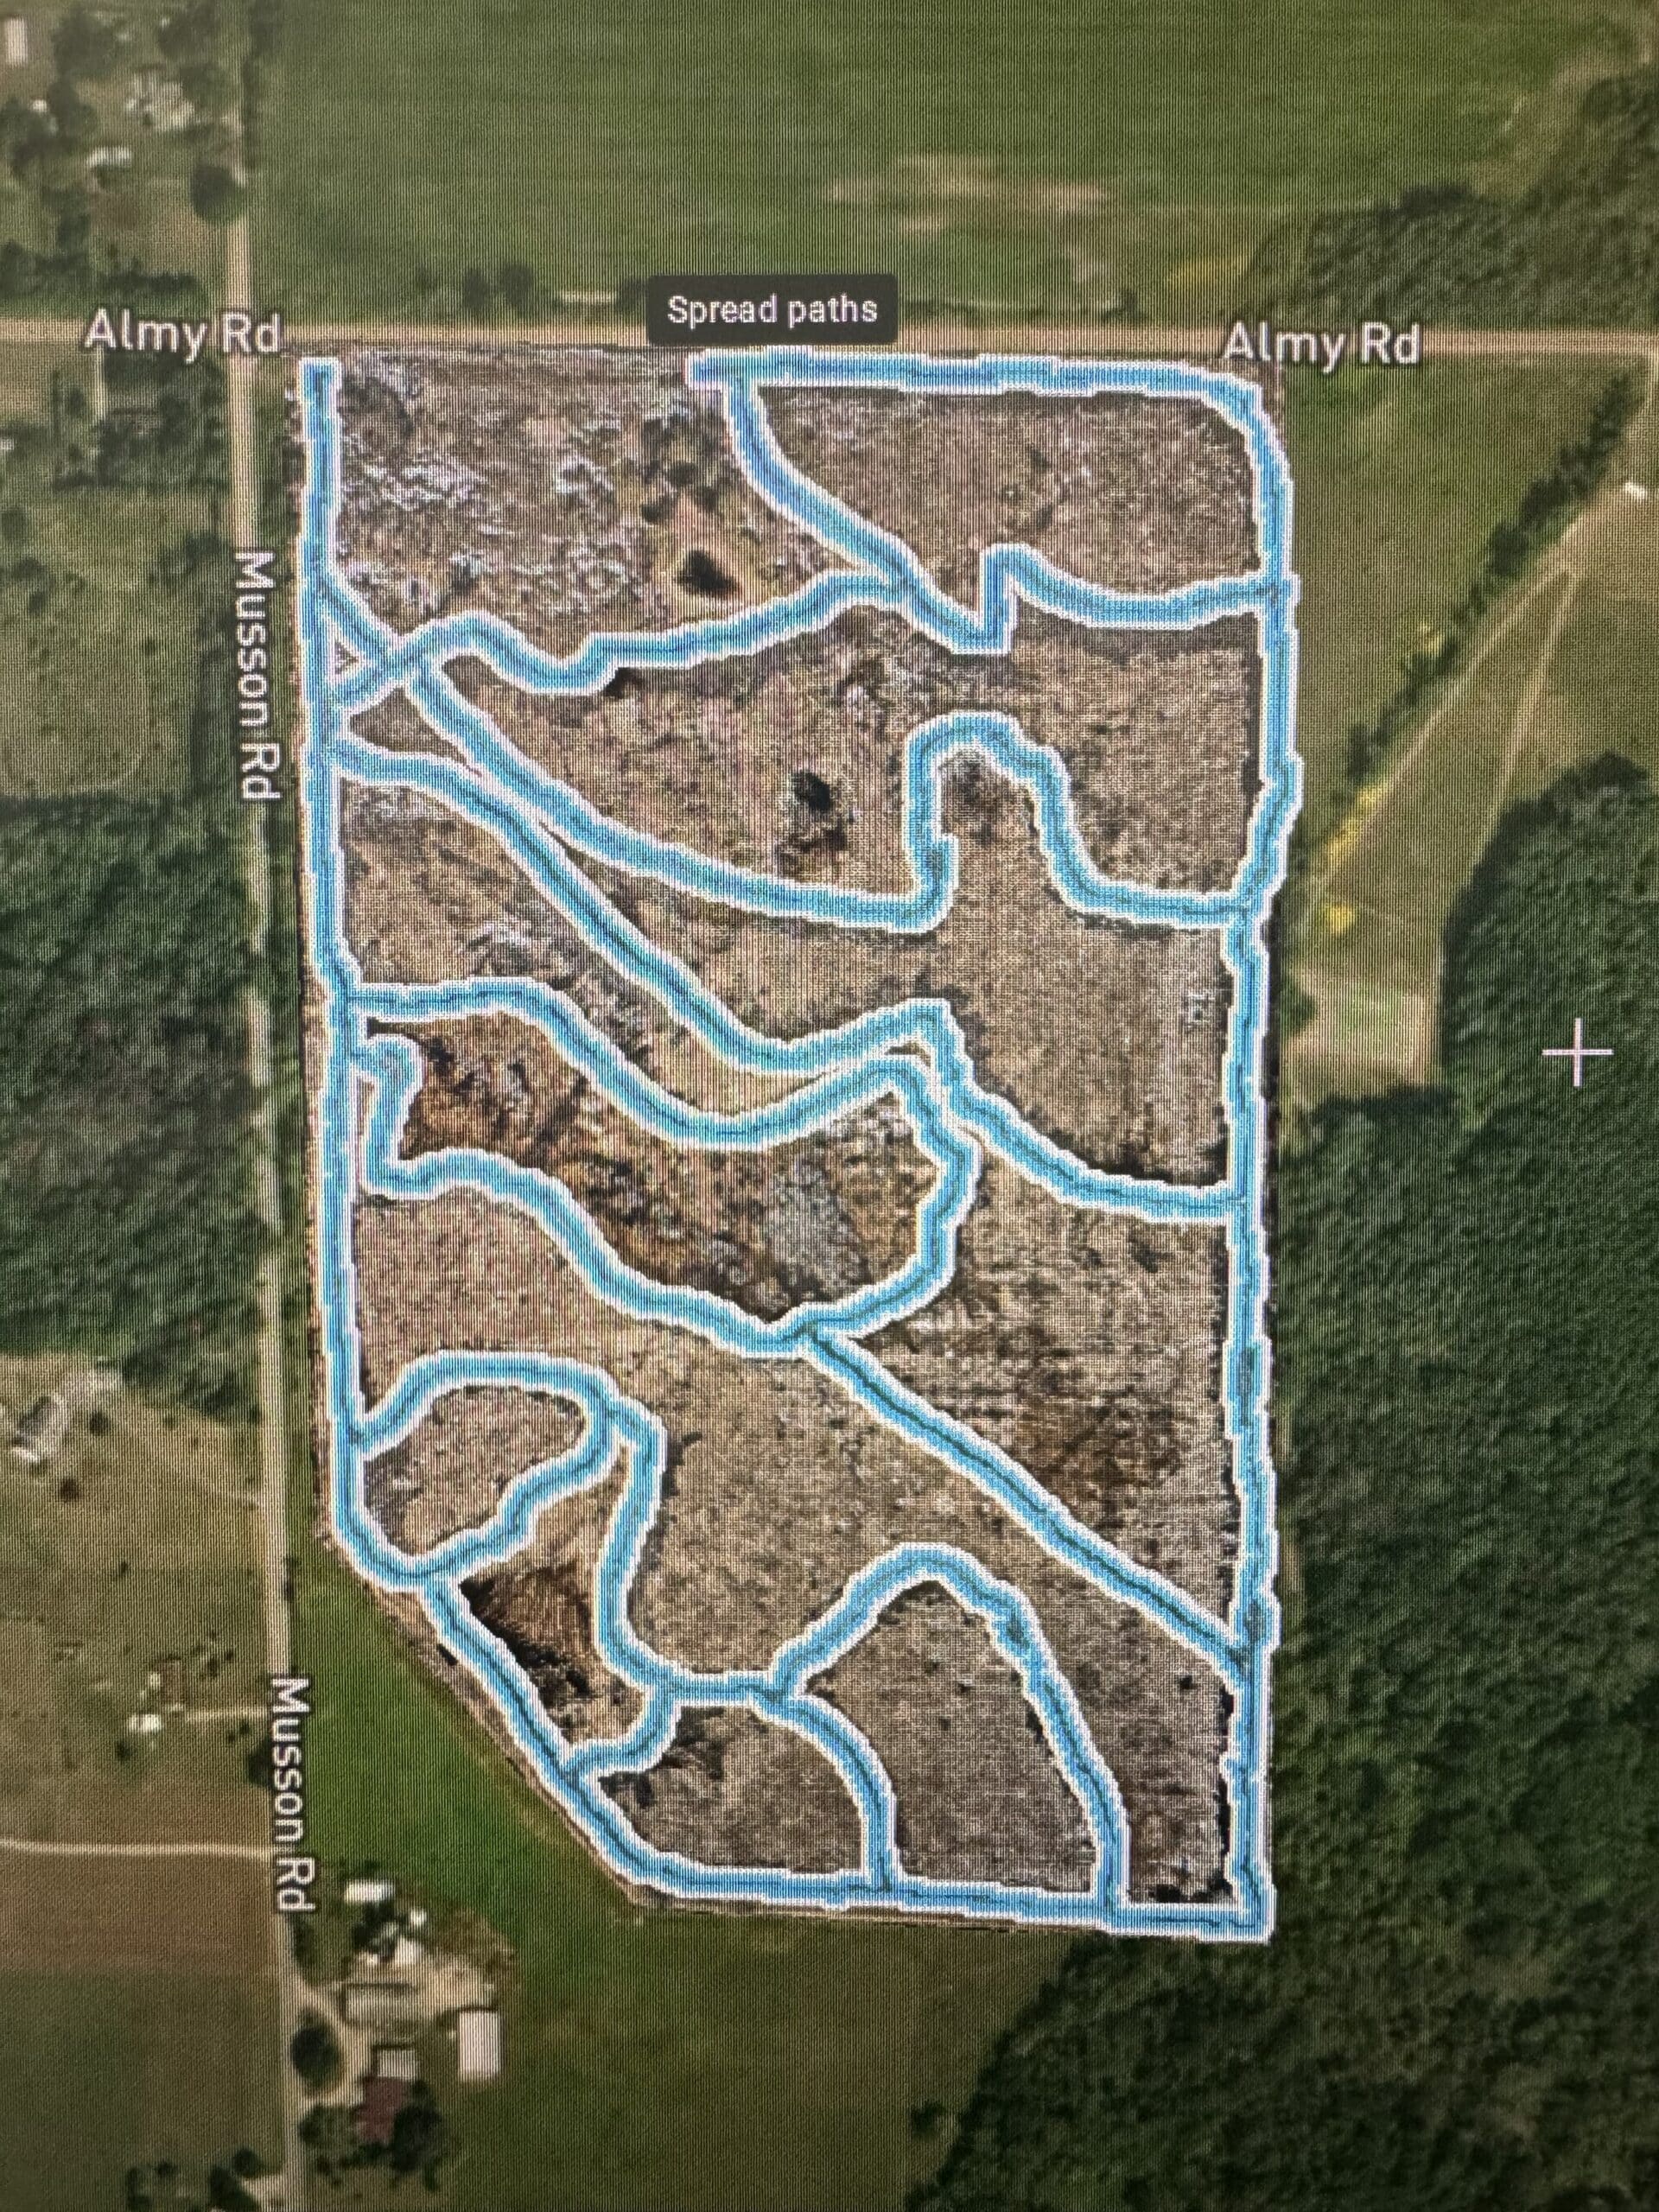 The image shows a drone's planned application paths for a substance across a bounded agricultural area, marked by precise lines against the surrounding landscape.